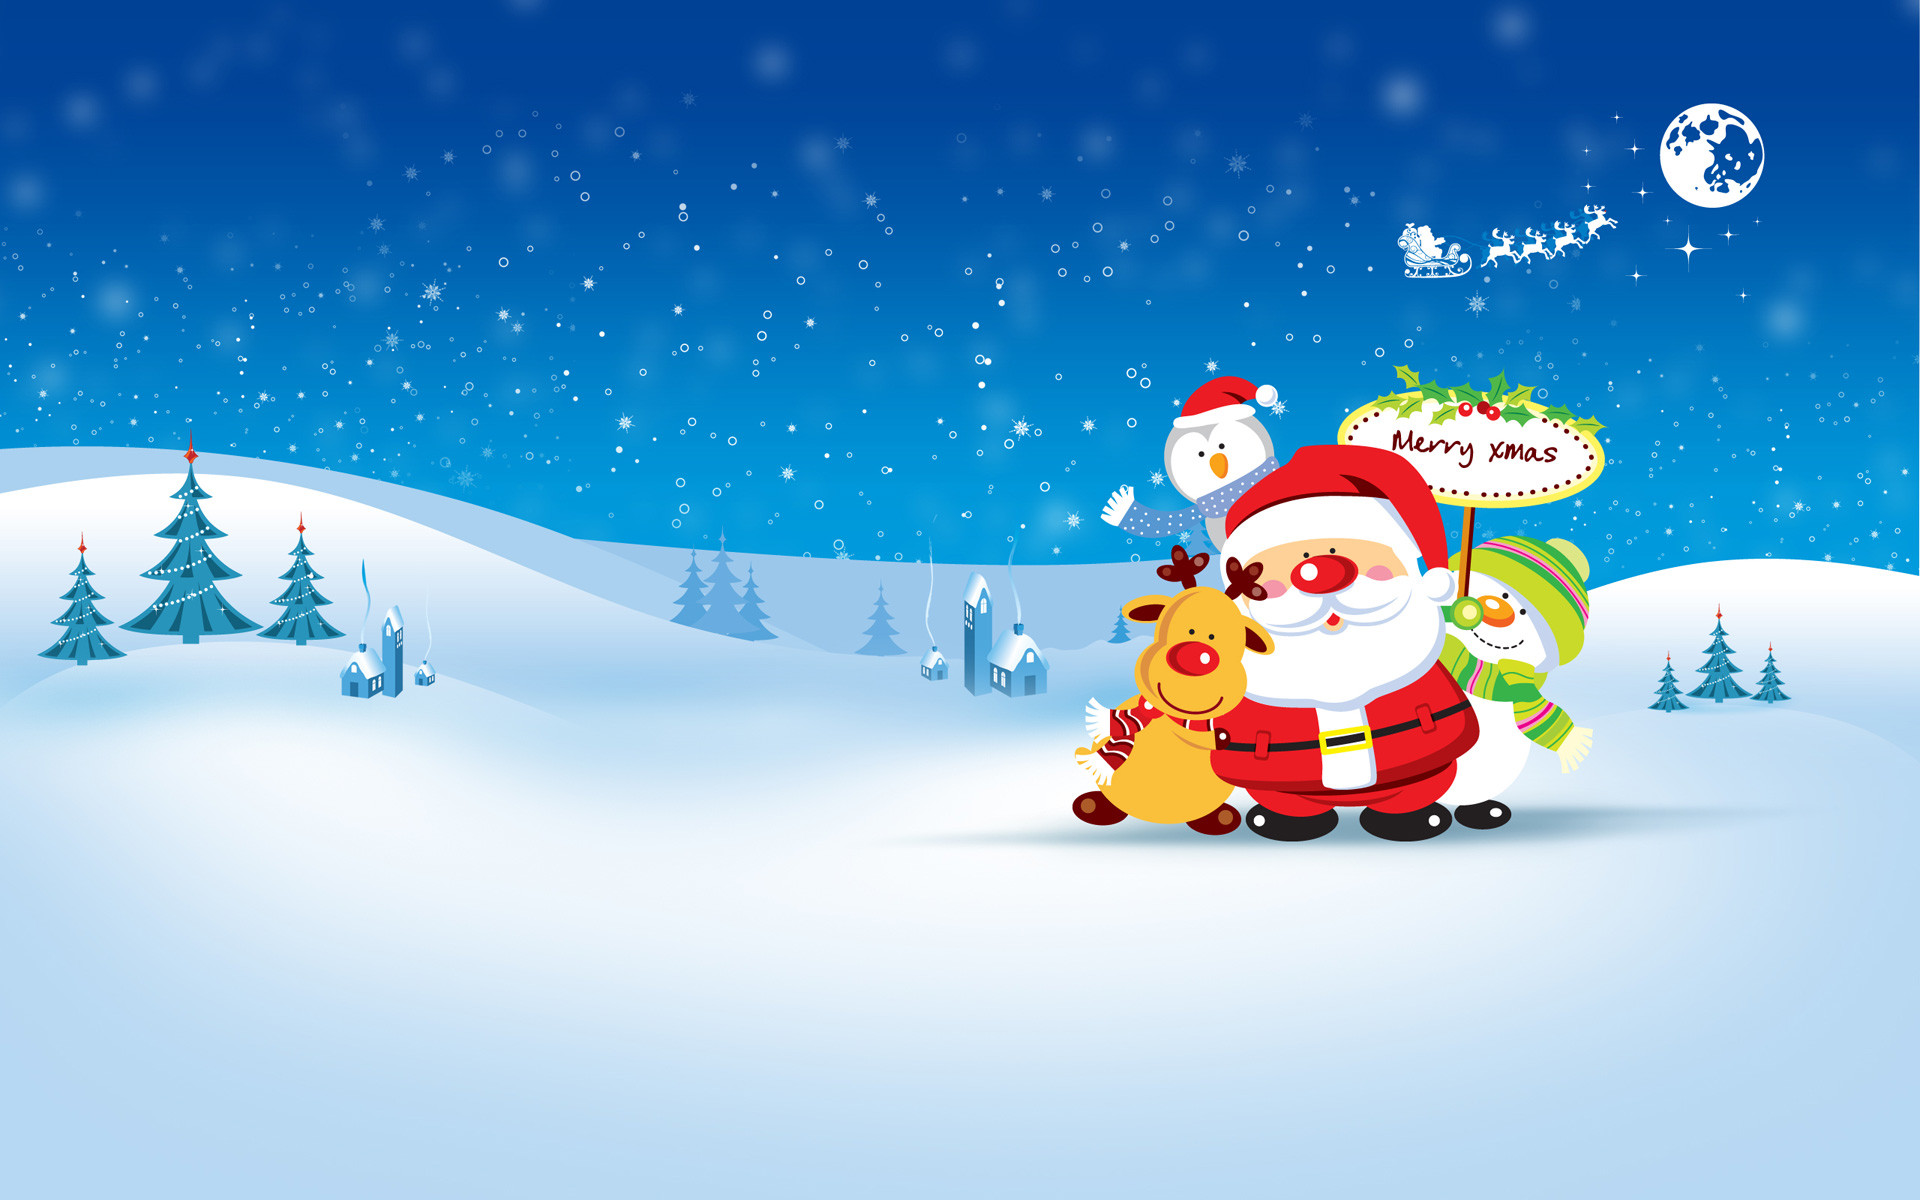 1920x1200 Winter Animal Cool Backgrounds 3761 - HD Wallpapers Site